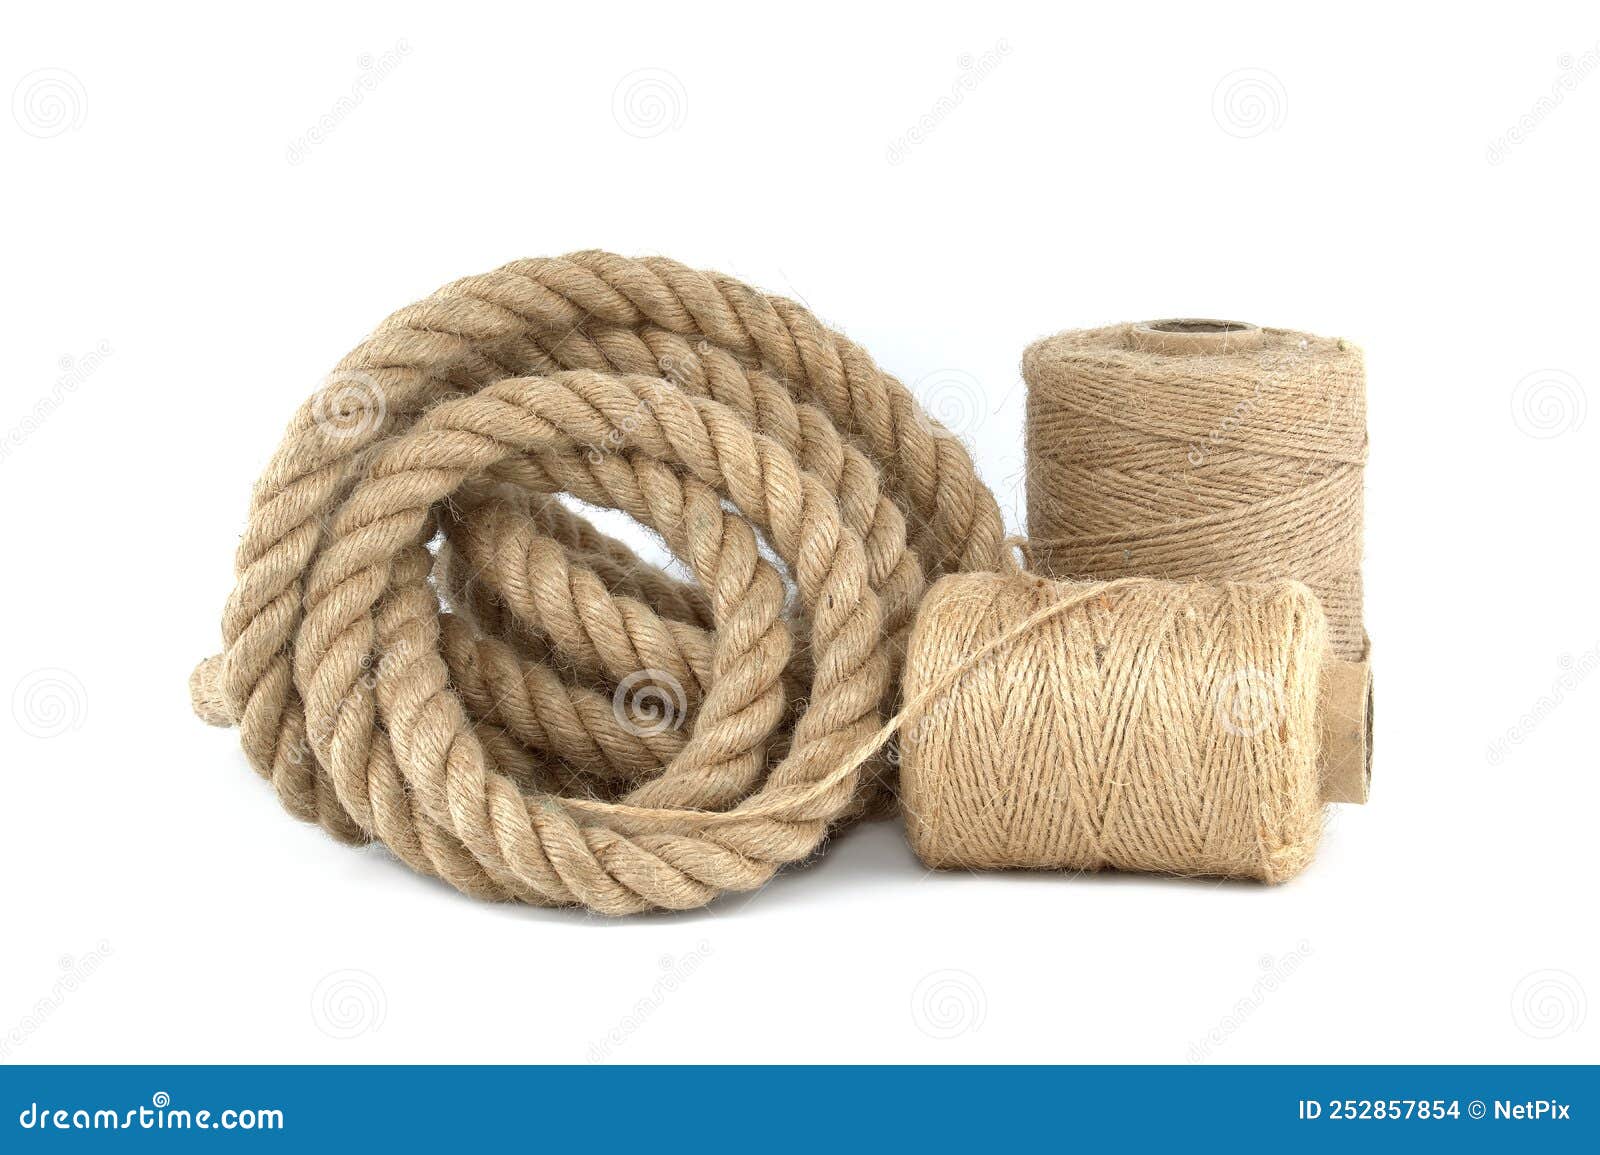 Twisted Jute Rope and Spools of Burlap Threads or Twine Stock